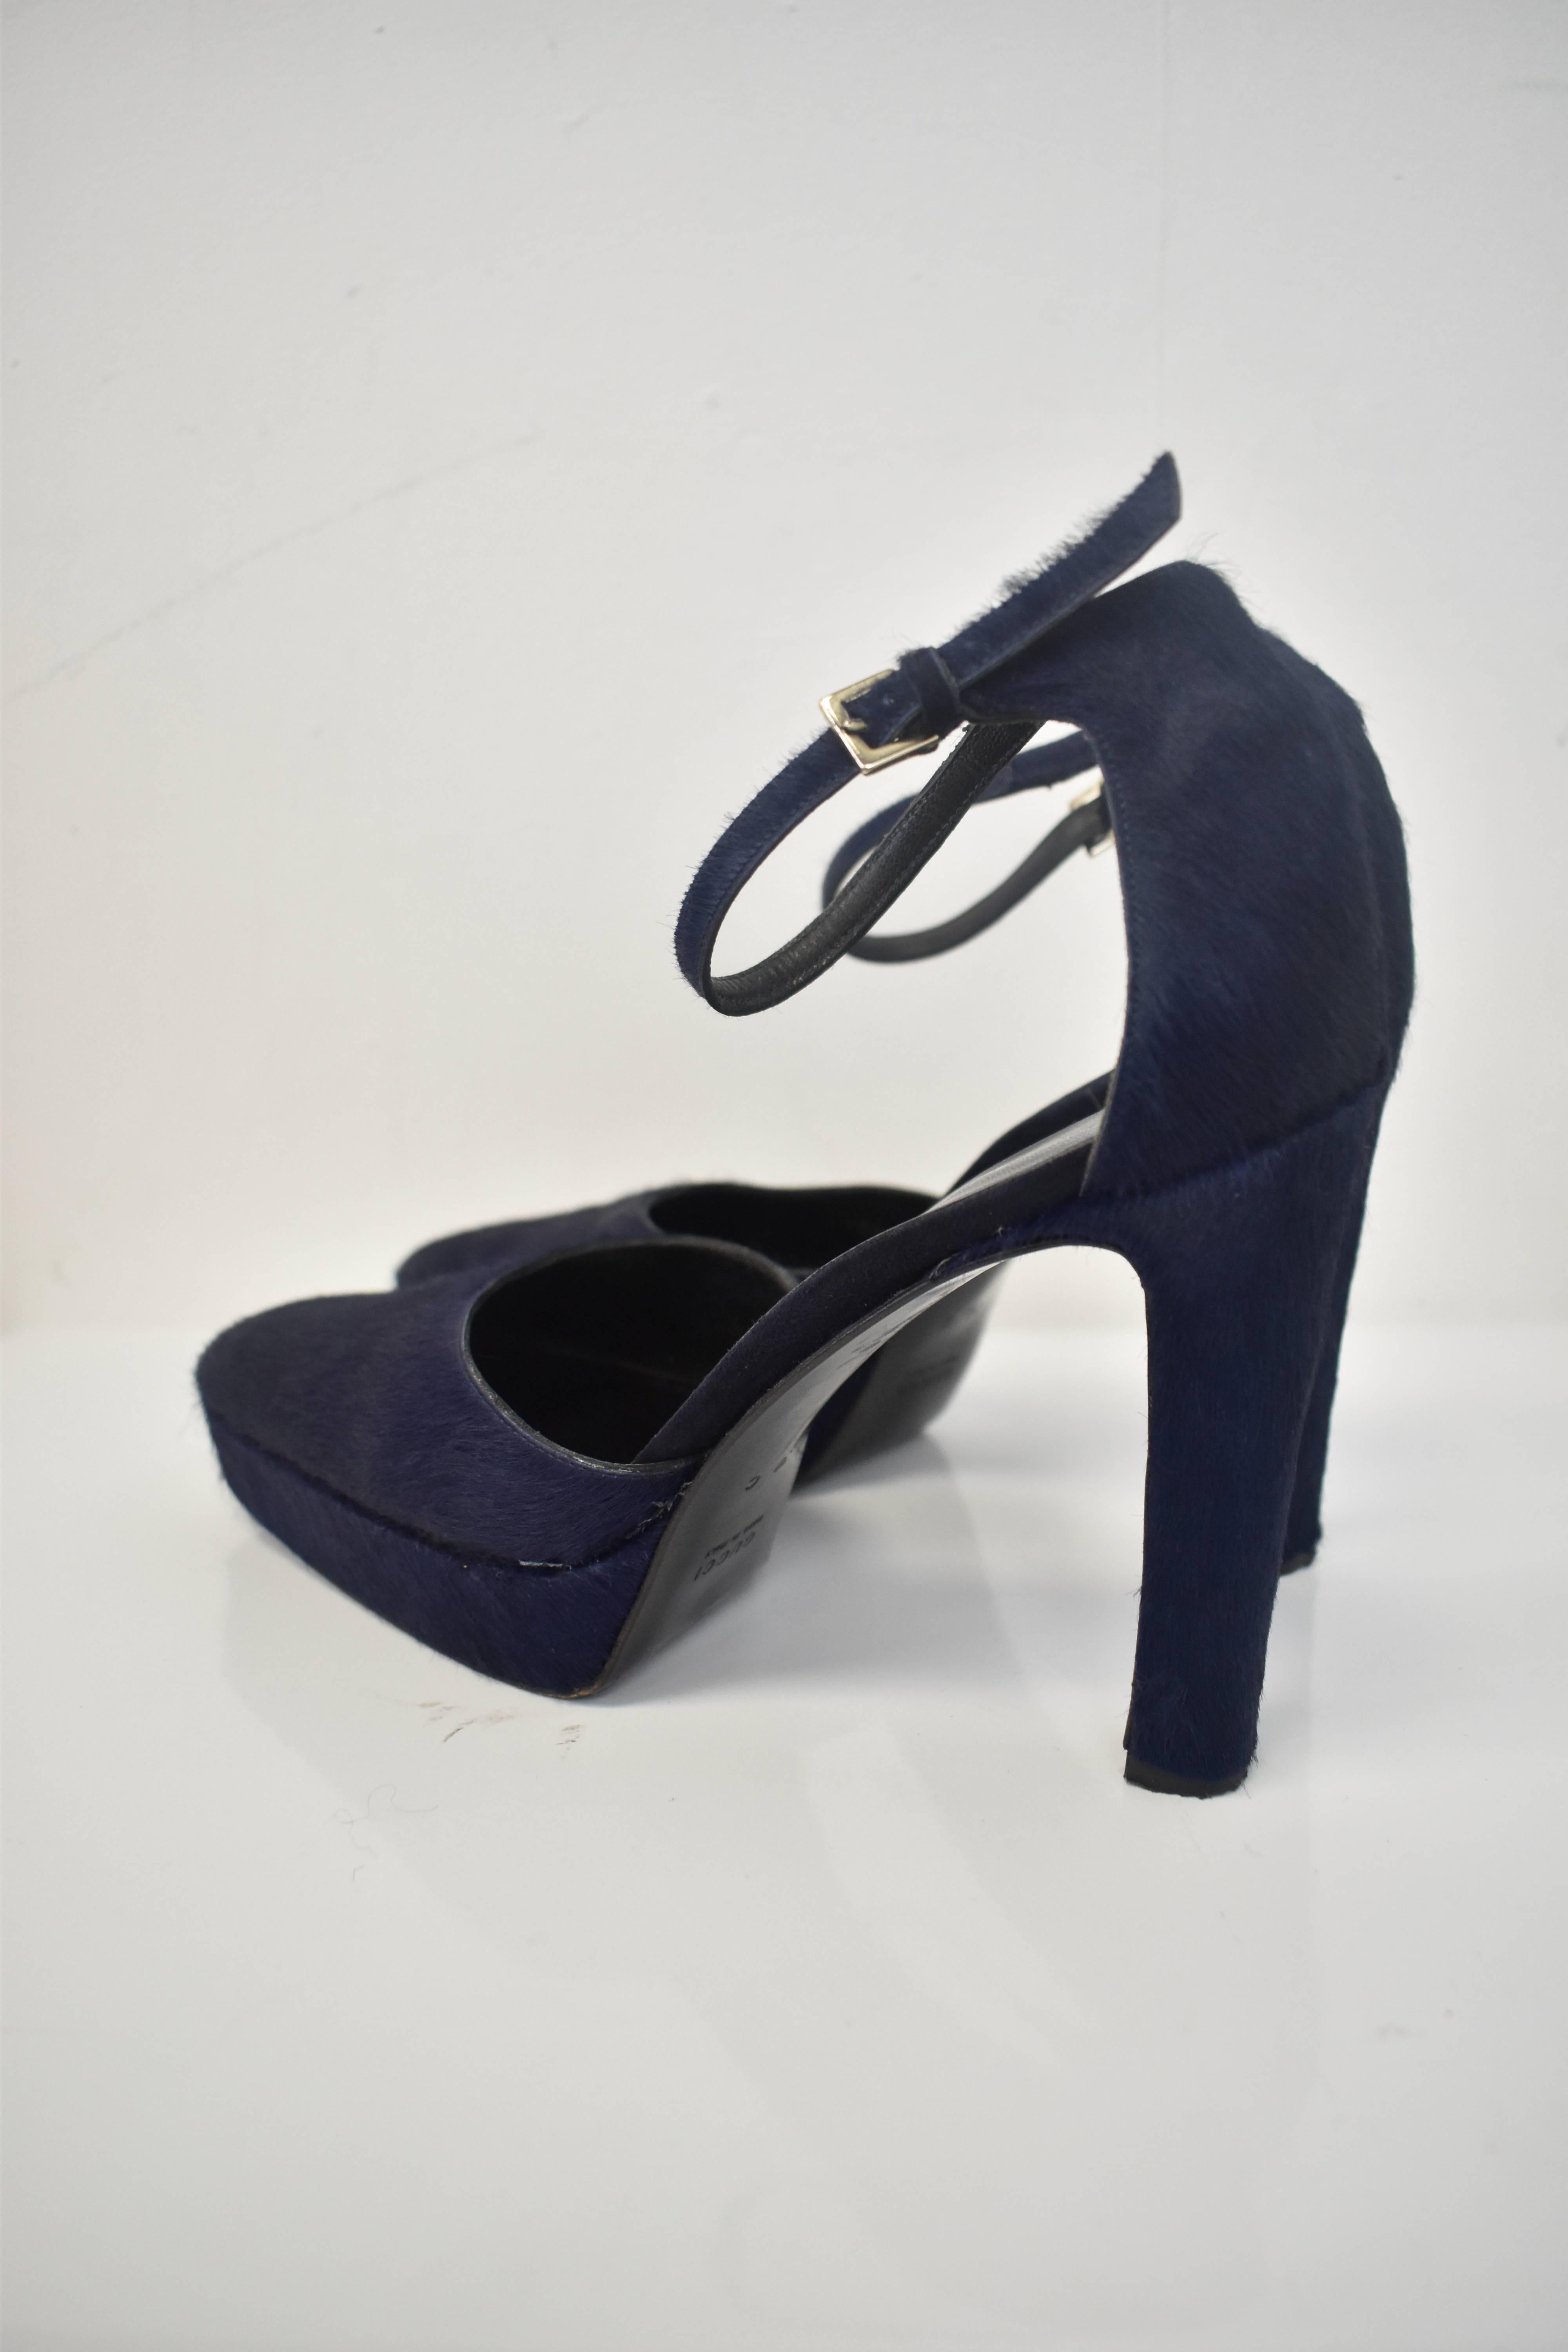 A beautiful pair of Gucci vintage shoes from the late 90s designed by Tom Ford during his tenure at the design house. The shoes have a classic court shape with heel, ankle strap, platform and closed toe design. They are made from a luxurious blue